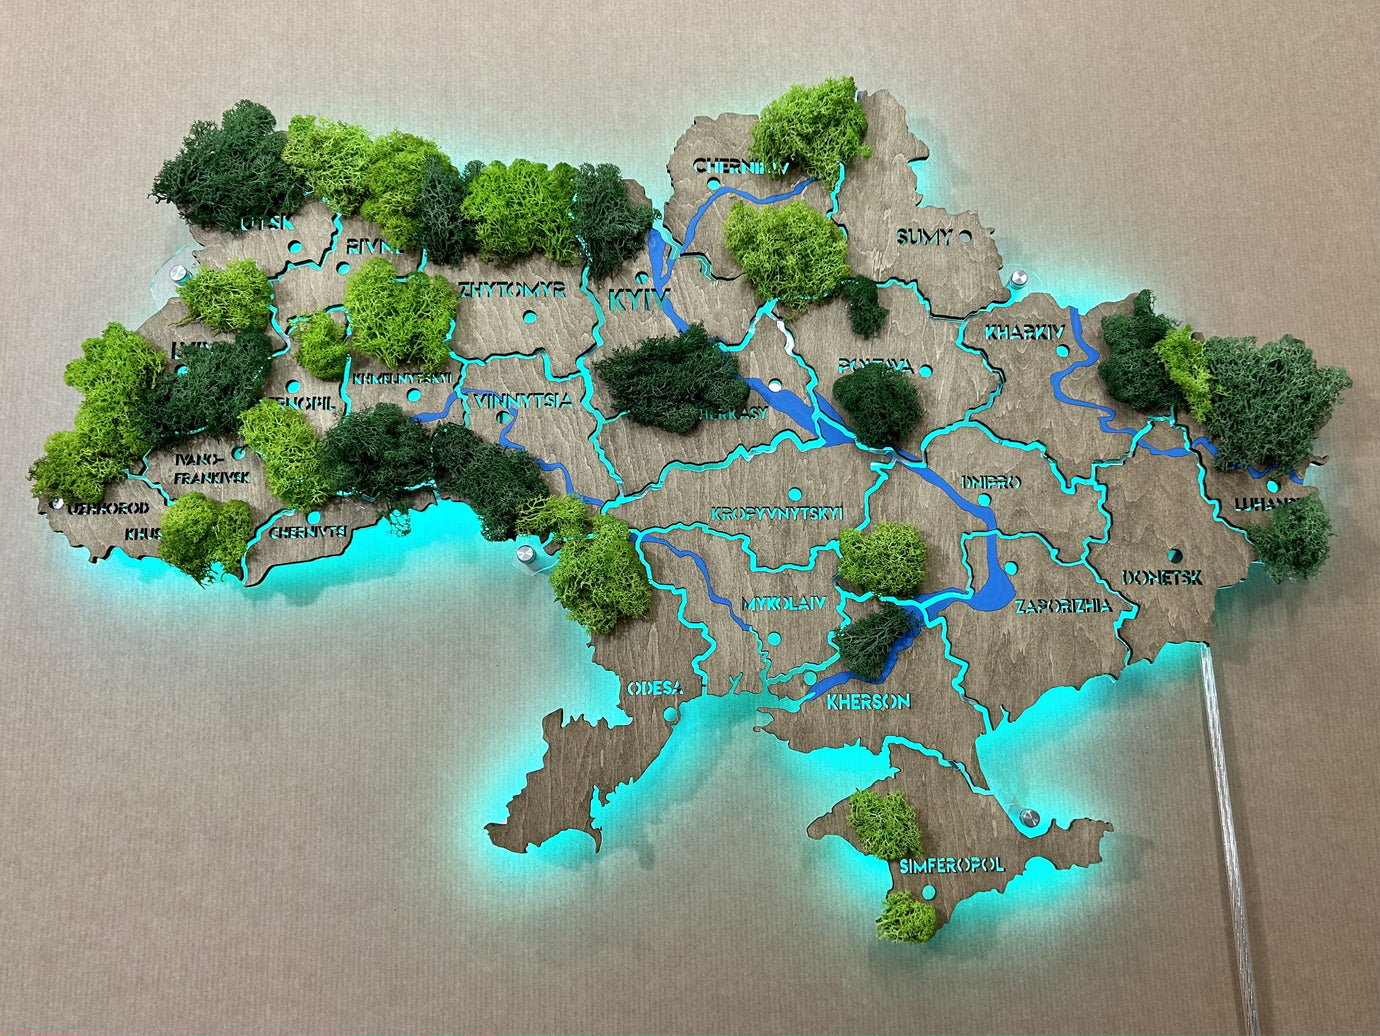 Ukraine RGB LED map on acrylic glass with rivers, moss and backlighting  between regions color Venge